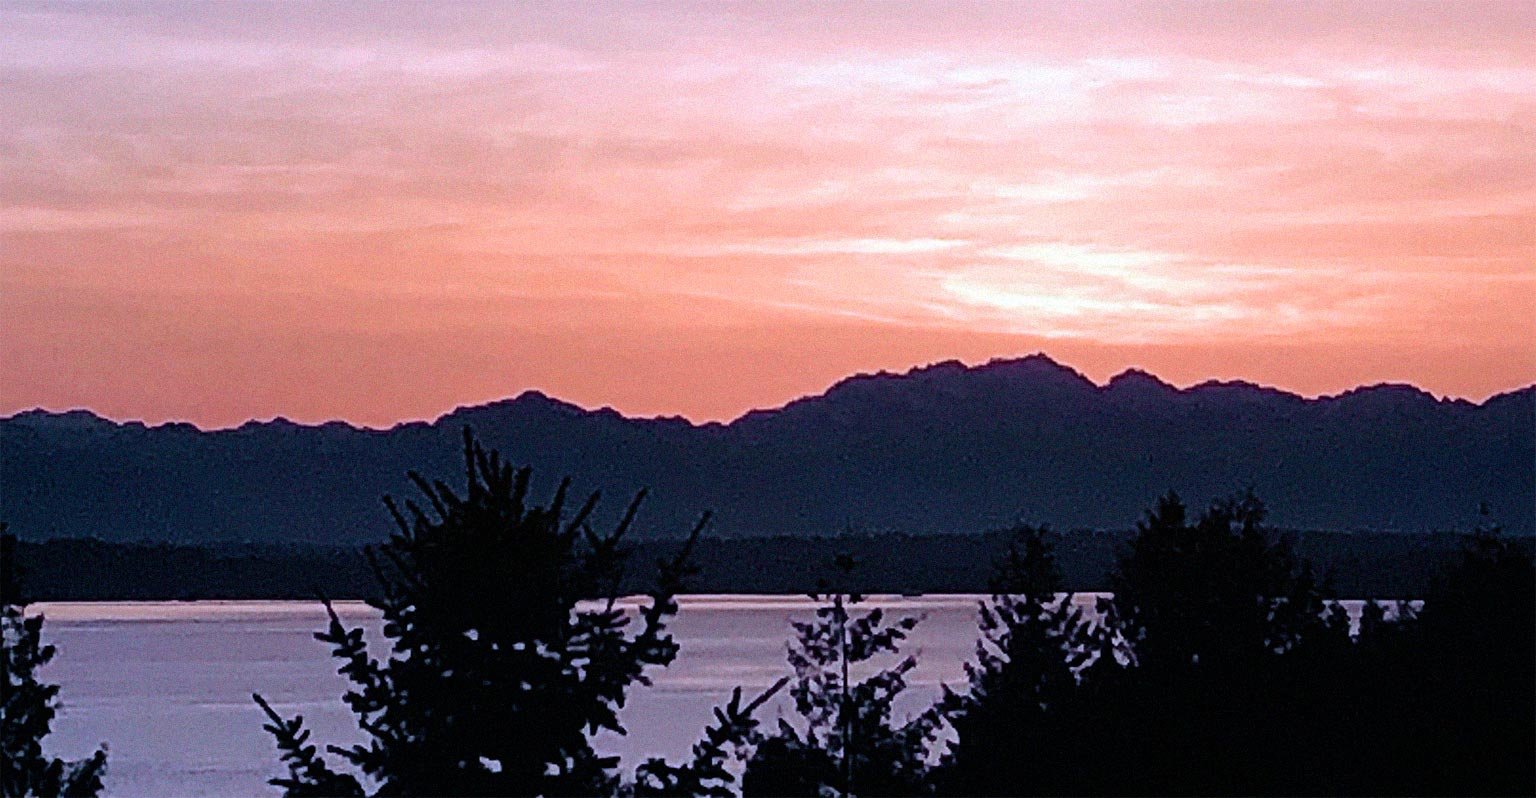 Sunset view from our old house in West Seattle. We miss it! 